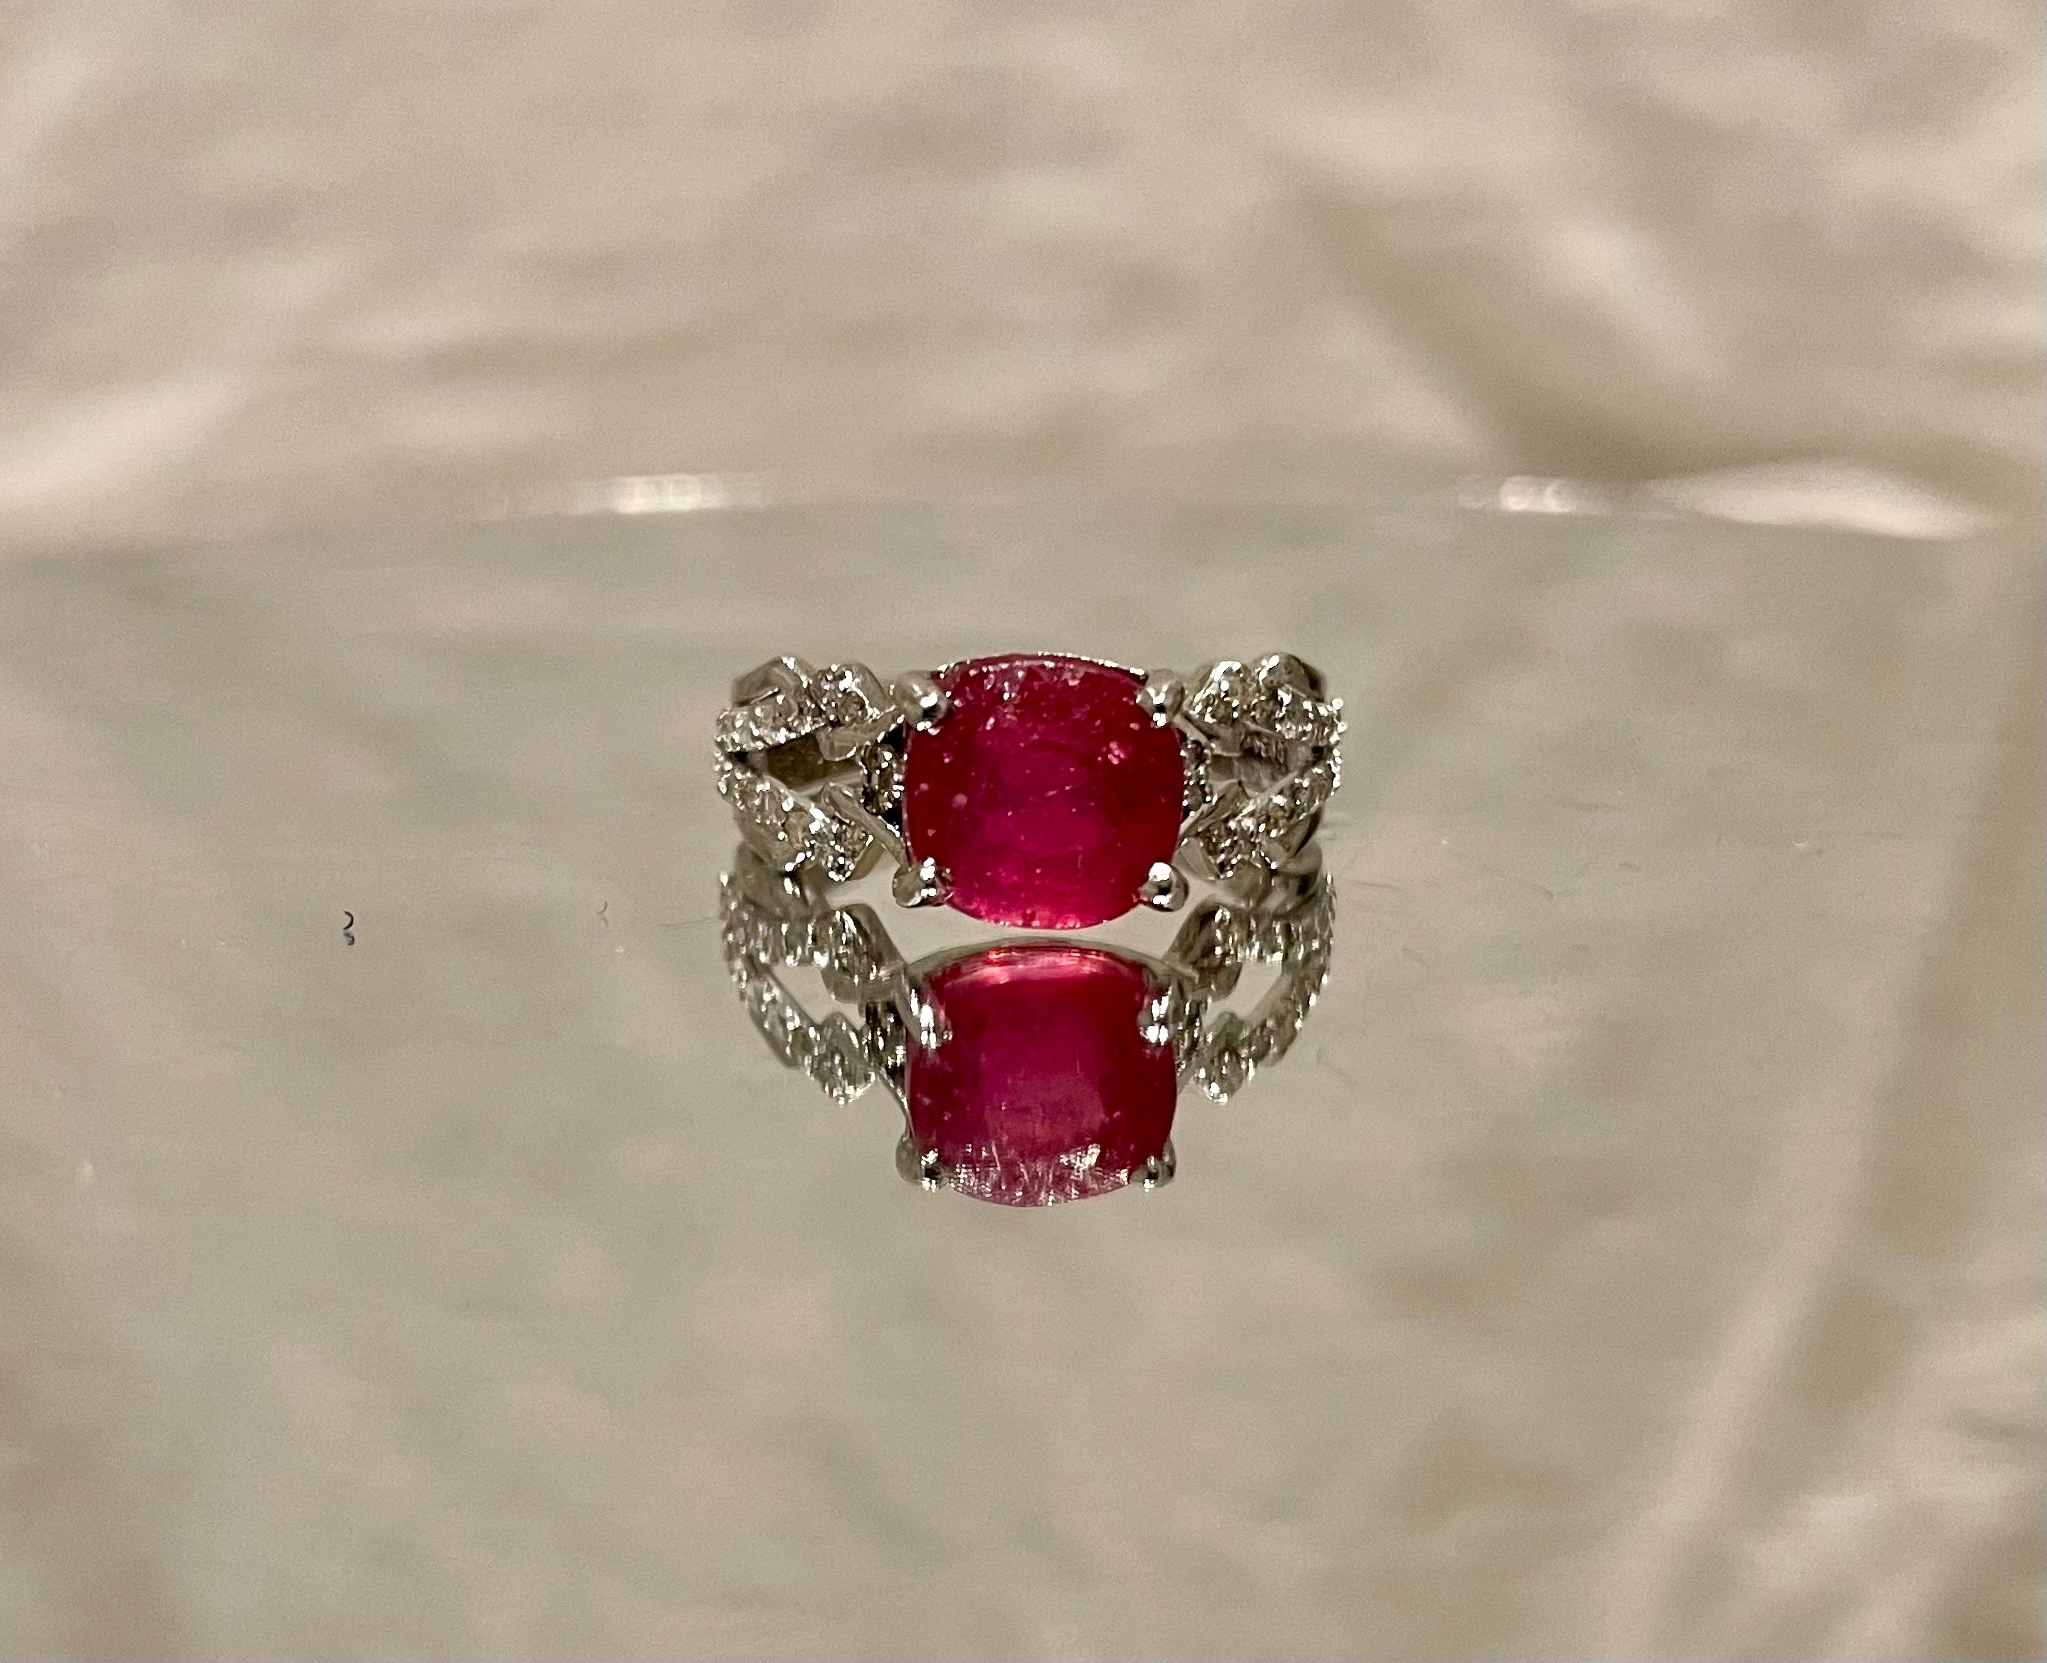 Natural Burmese Ruby Ring 3.35 Ct With Natural Diamonds & 18kGold - Image 2 of 5